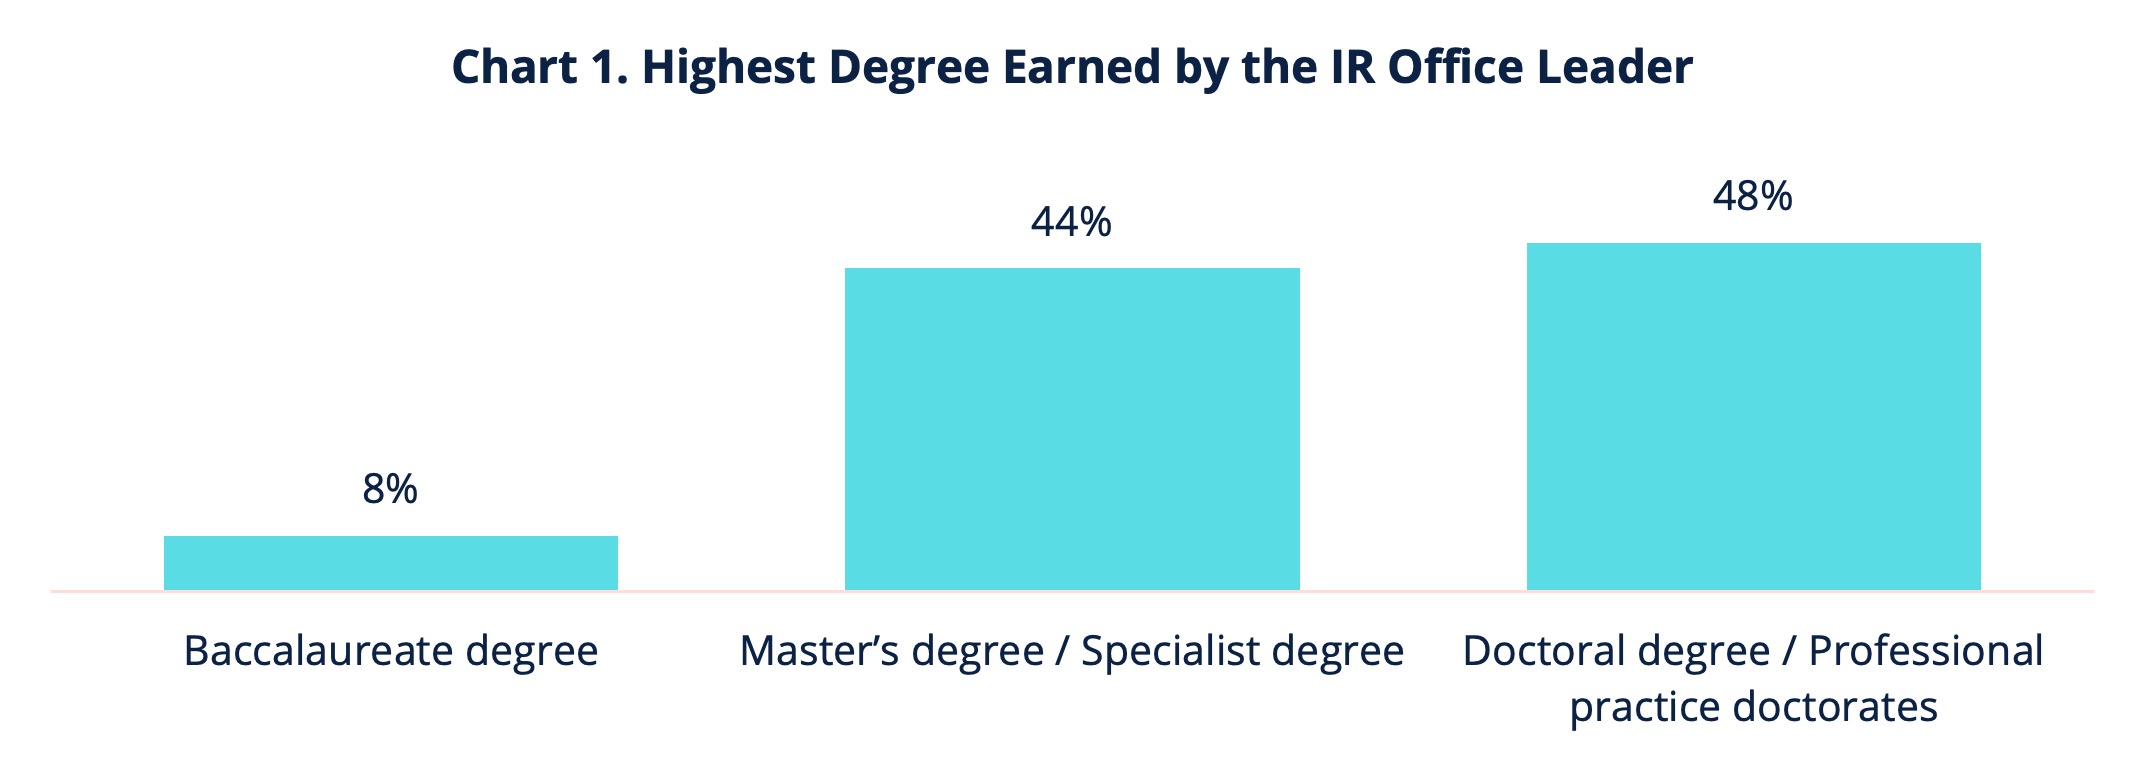 Chart 1. Highest Degree Earned by the IR Office Leader. 8% Baccalaureate degree; 44% Master's degree / Specialist degree; 48% Doctoral degree / Professional practice doctorates

 